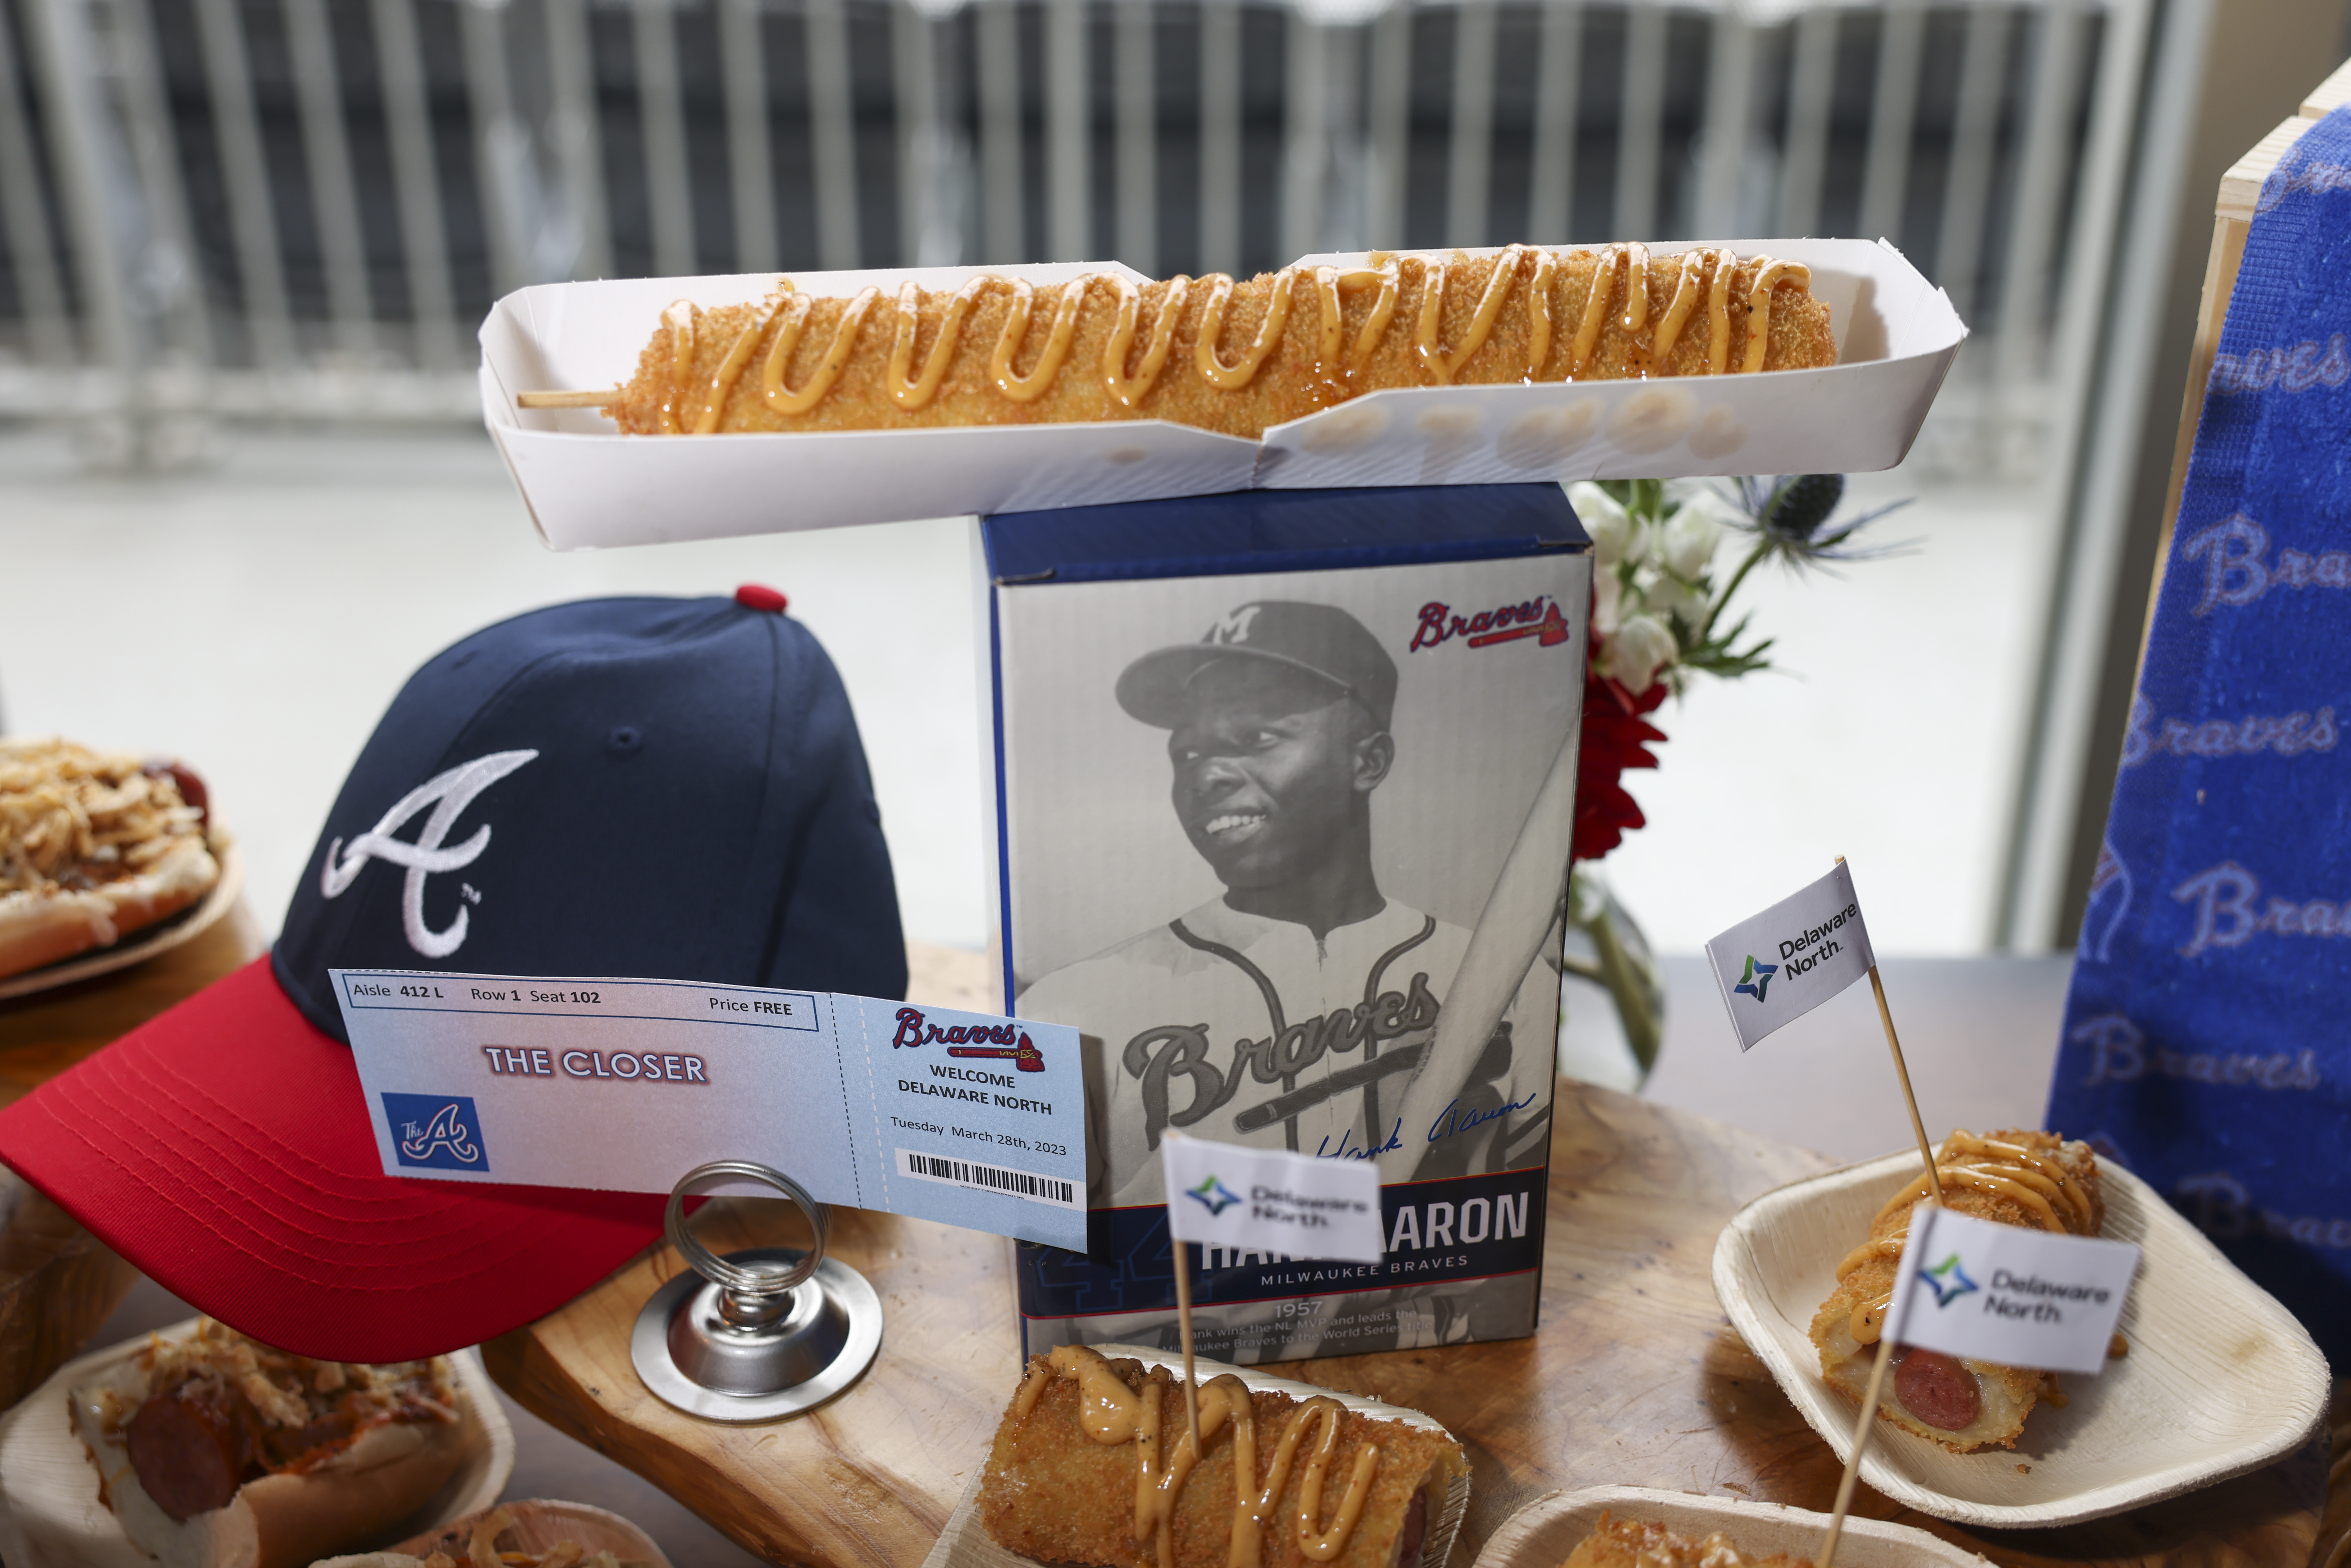 Take a tasting tour of new food at SunTrust Park